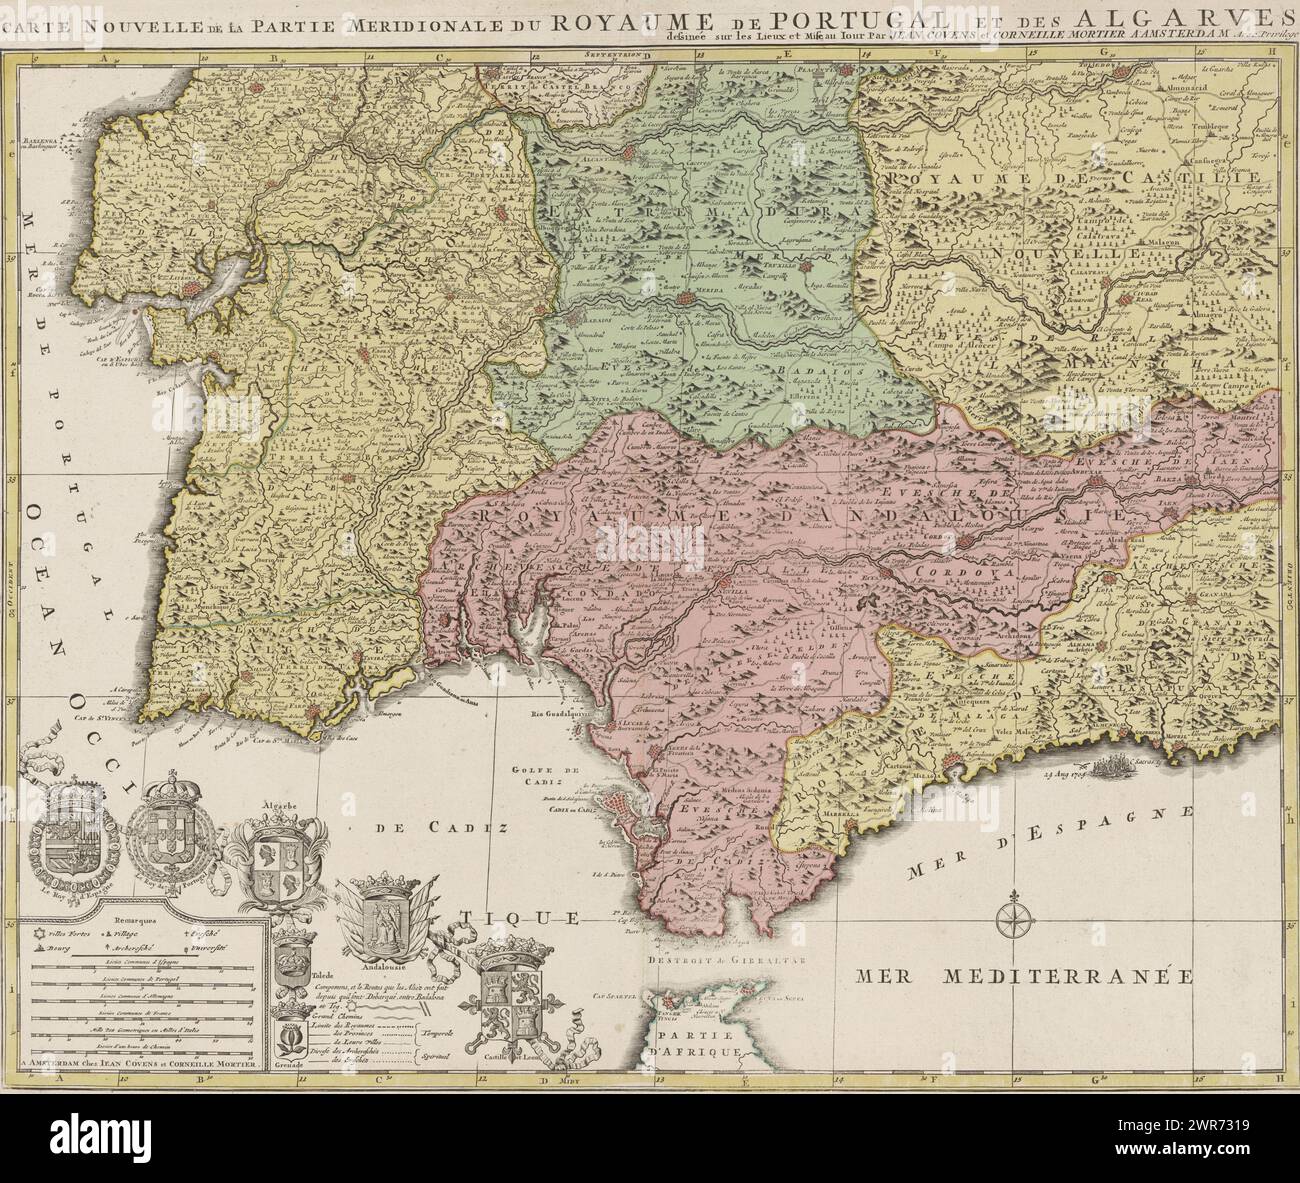 Map of the south of Spain and Portugal, Map showing part of Portugal and the Spanish south coast. Part (bottom left sheet) of a large map of Spain and Portugal in four sheets, ca. 1703. Bottom left the legend and the coats of arms of Spain and Portugal, connected to the coats of arms of the Algarve (under which the city coats of Toledo and Grenada hang), Andalusia and Castile and León., print maker: Jan Luyken, (possibly), print maker: Caspar Luyken, (possibly), publisher: Covens & Mortier, Amsterdam, 1720 - 1772, paper, engraving, etching, height 503 mm × width 600 mm Stock Photo